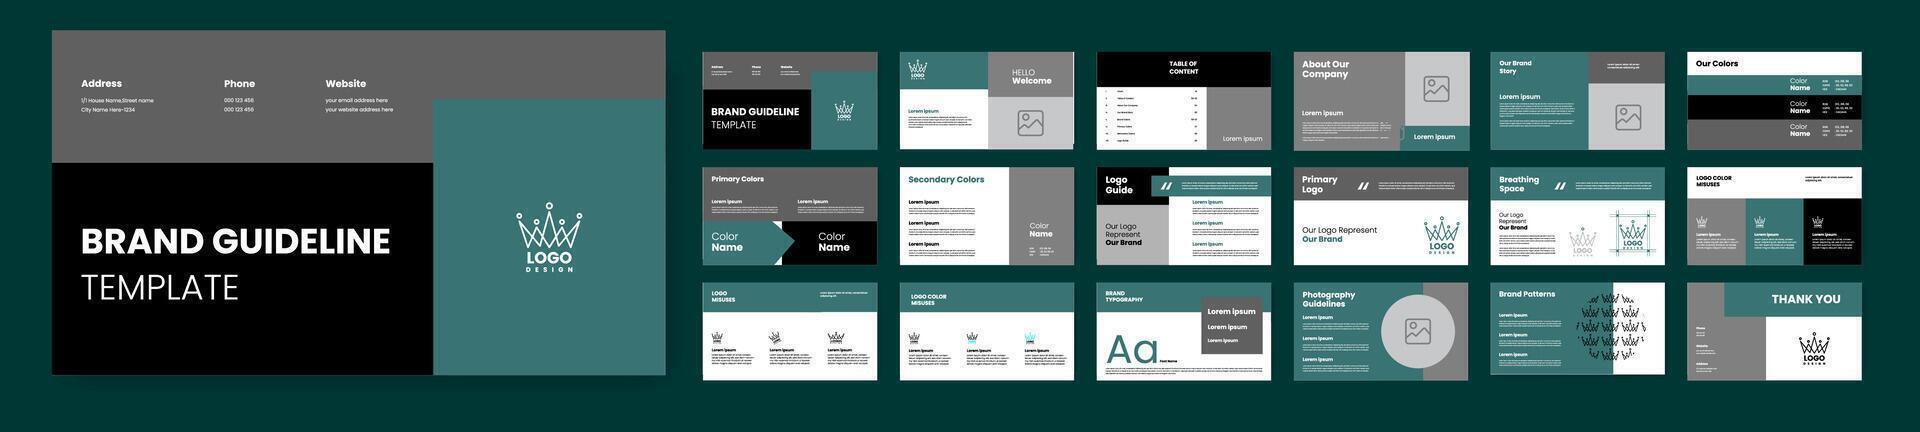 Style Guide Template for Branding Guidelines. Minimalist Blue Accent vector